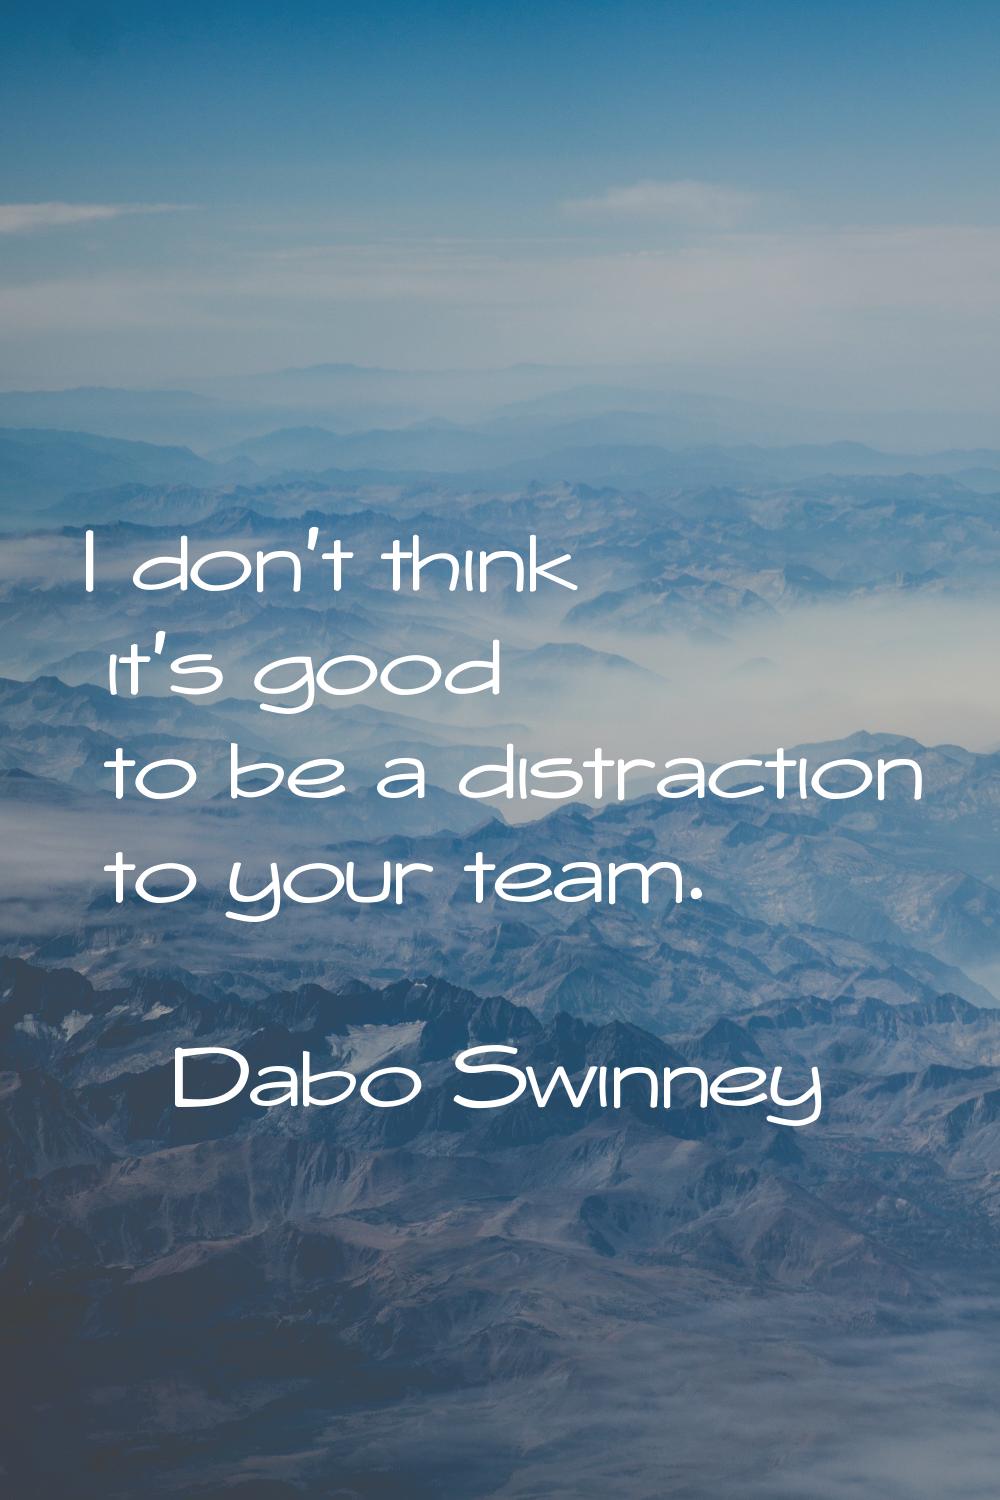 I don't think it's good to be a distraction to your team.